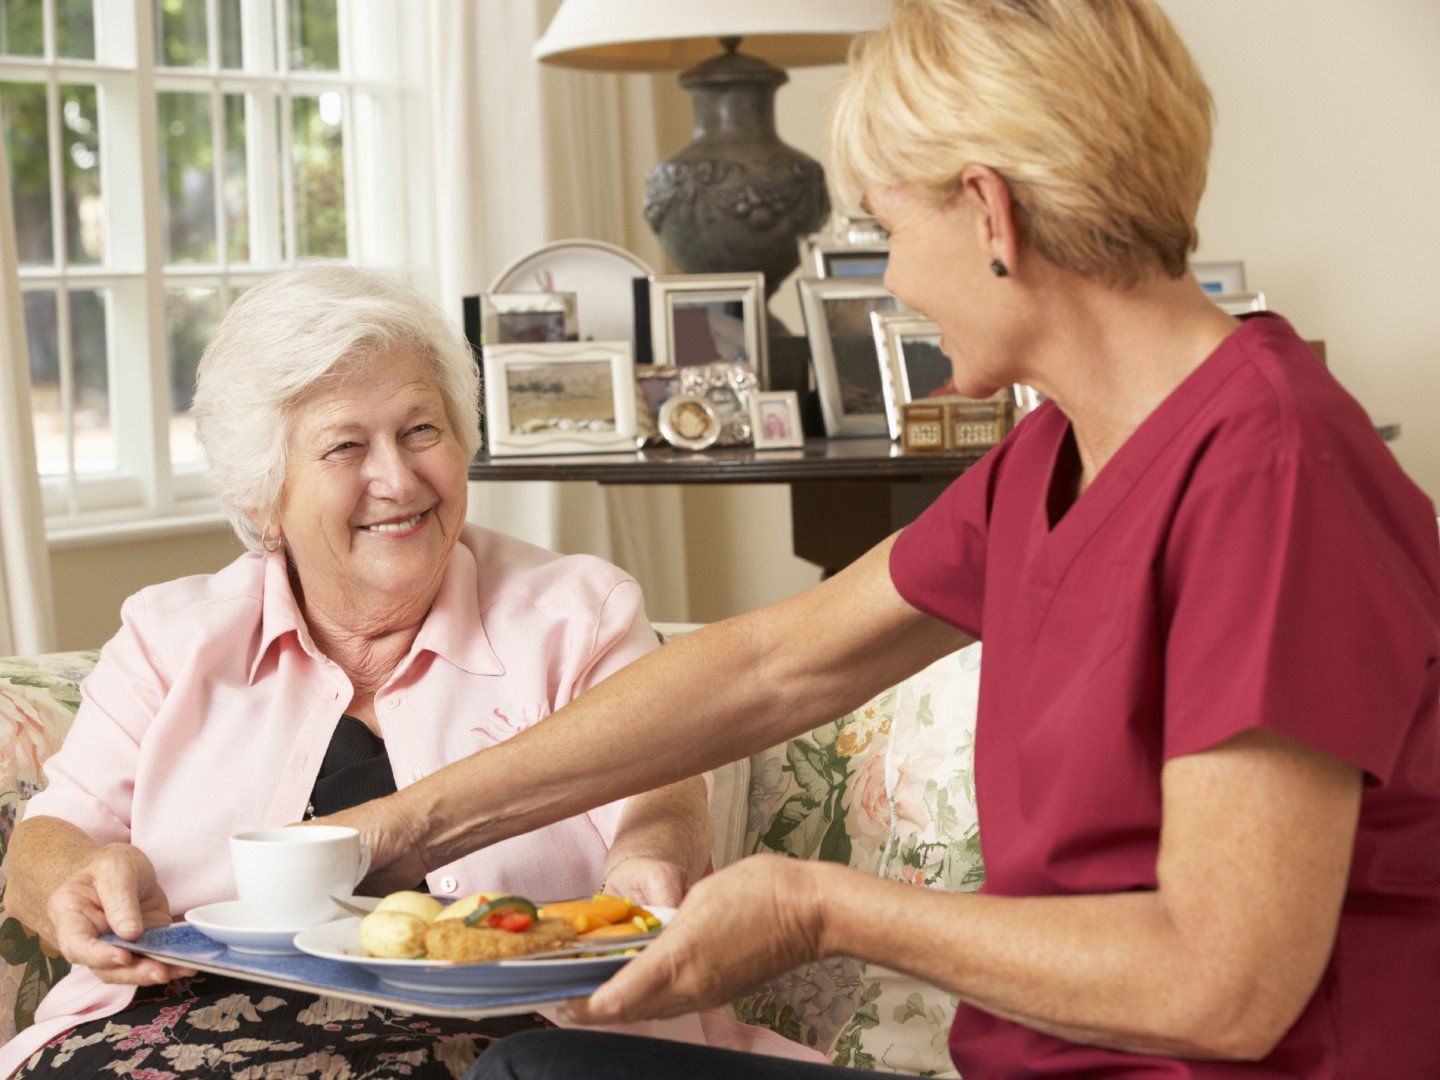 Caregiver giving meal to an elderly woman